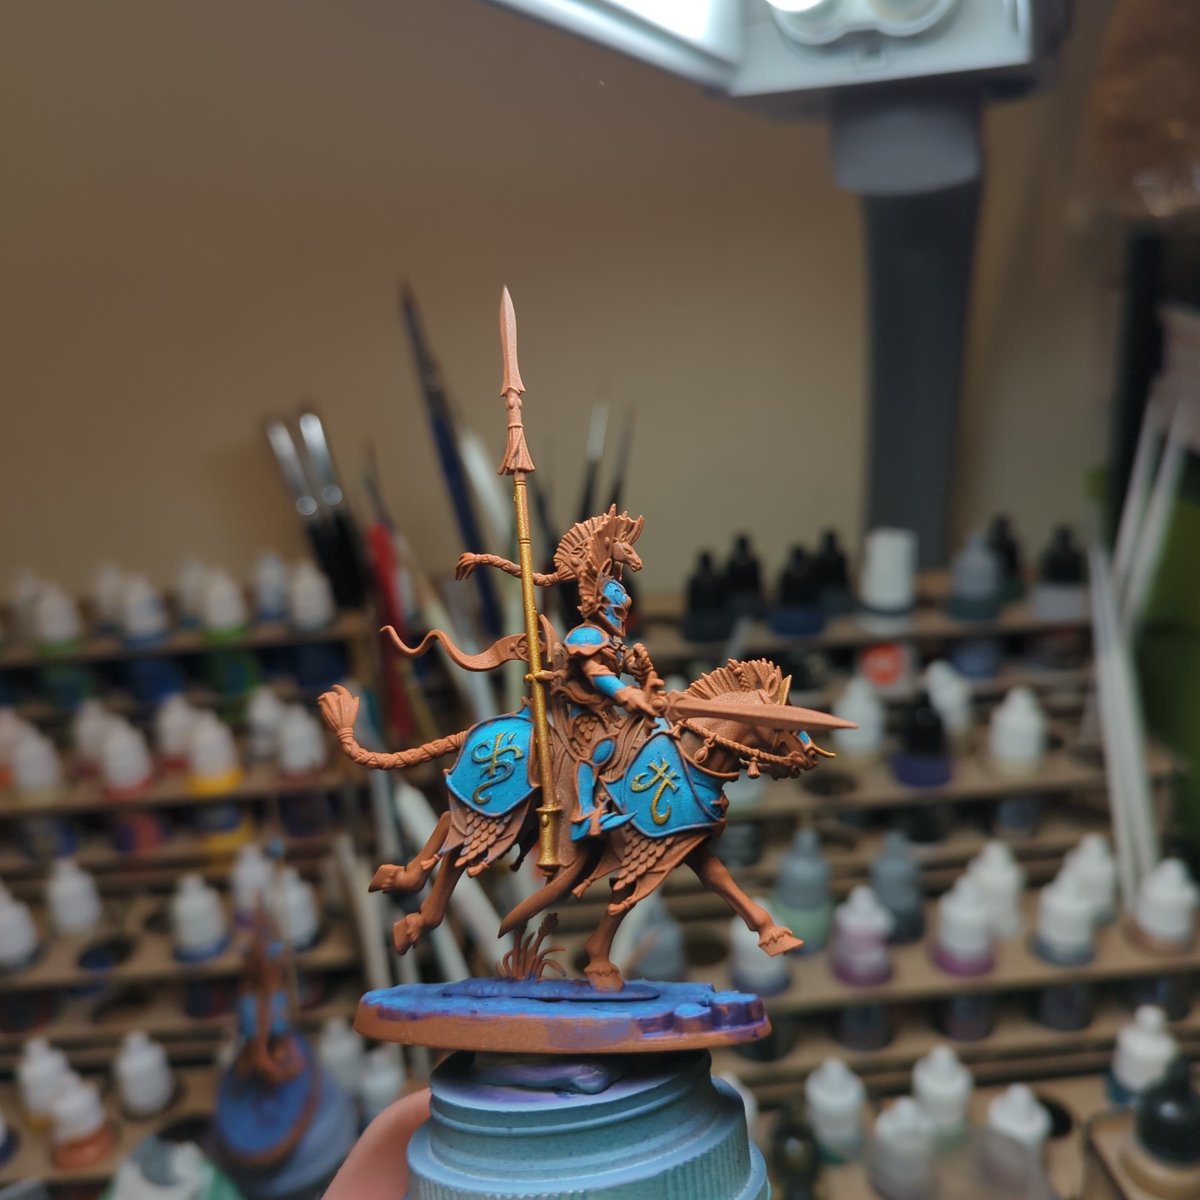 Hobby Streak Day 775
Slowly getting there! A little bit of gold and some details!
#hobbystreak #warhammeraos #ageofsigmar #luminethrealmlords